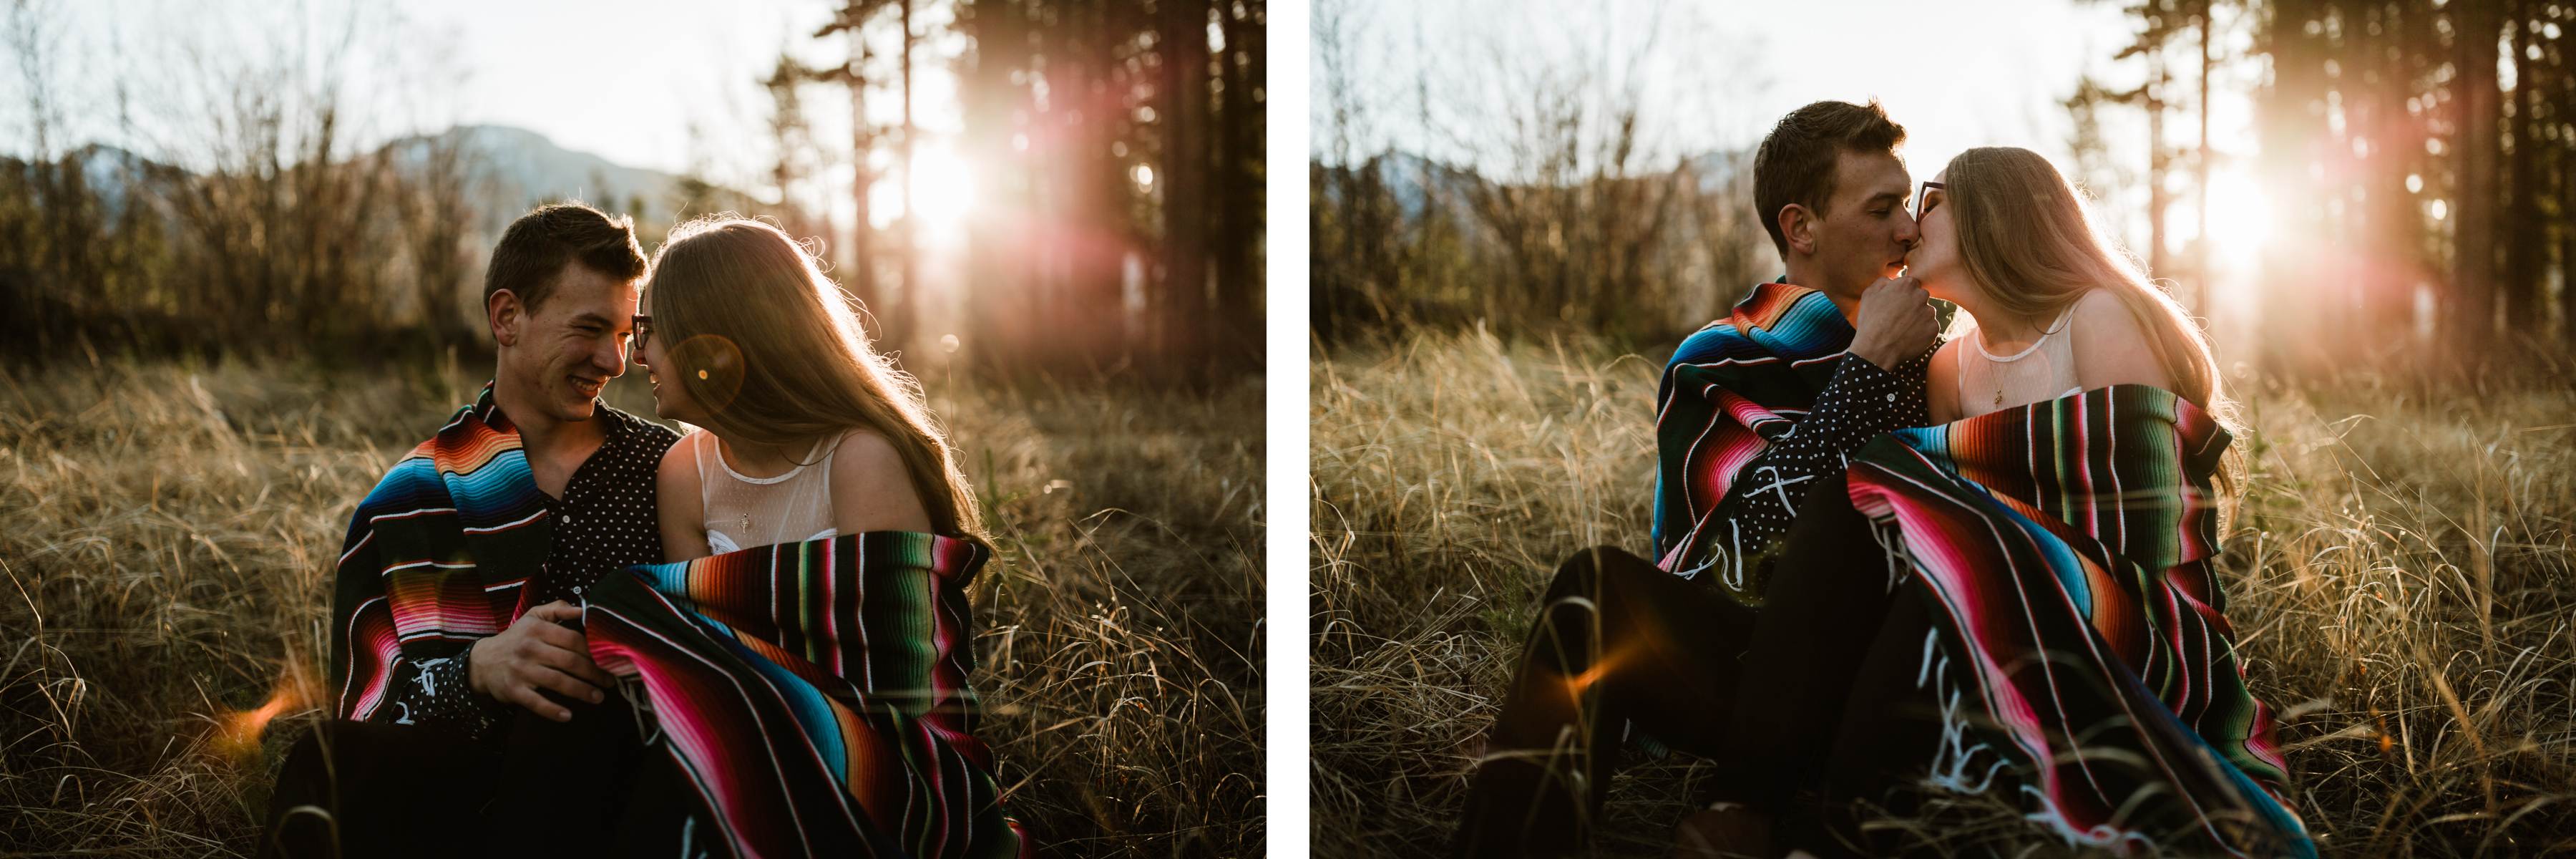 Canmore Engagement Photographers Adventure Session near Ha Ling Mountain - Photo 16